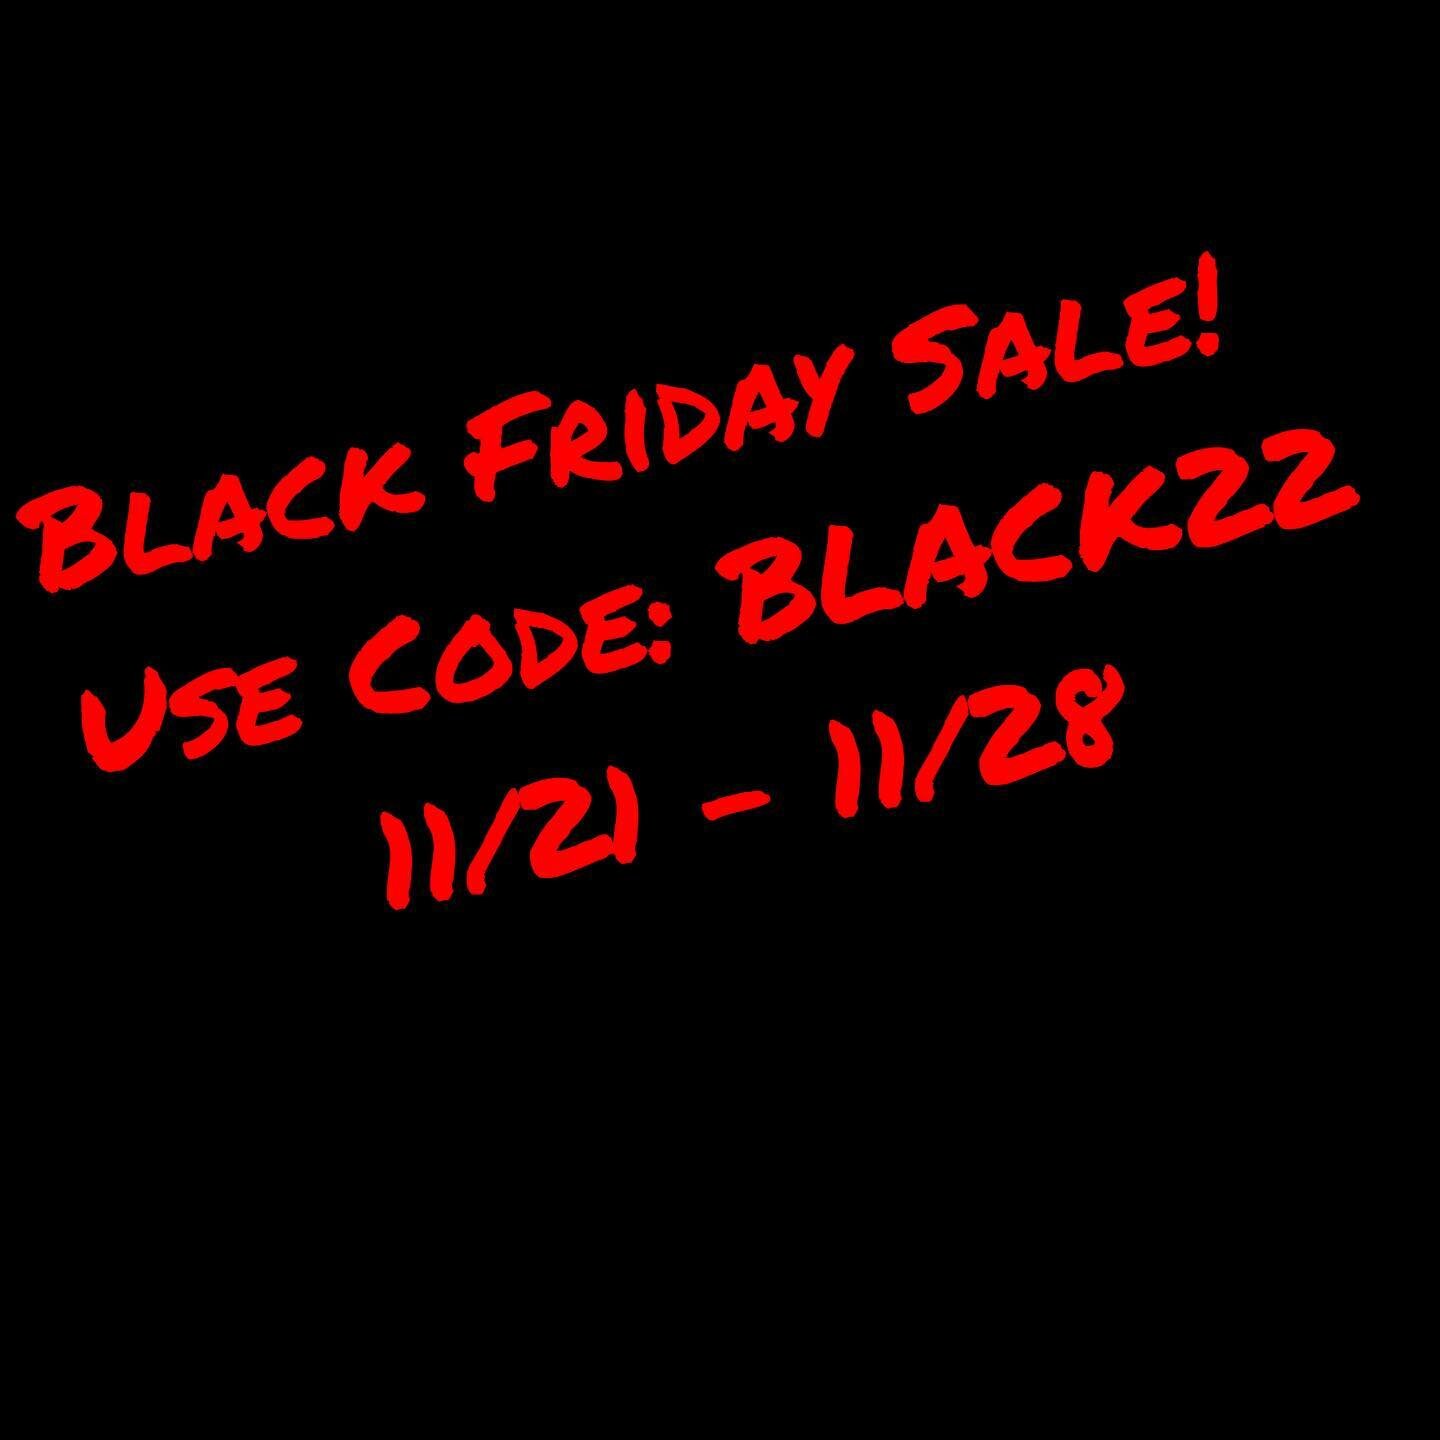 BLACK FRIDAY SALE
Used code: BLACK22
www.TheodoreVernell.com
On Etsy the code is not needed.

#locjourney #locjourneybegins #locjourneycontinues #menwithdreads #menwithlocs #blackfriday2022 #locproducts #beanie #beanies #beanieseason #beanieboy #bean